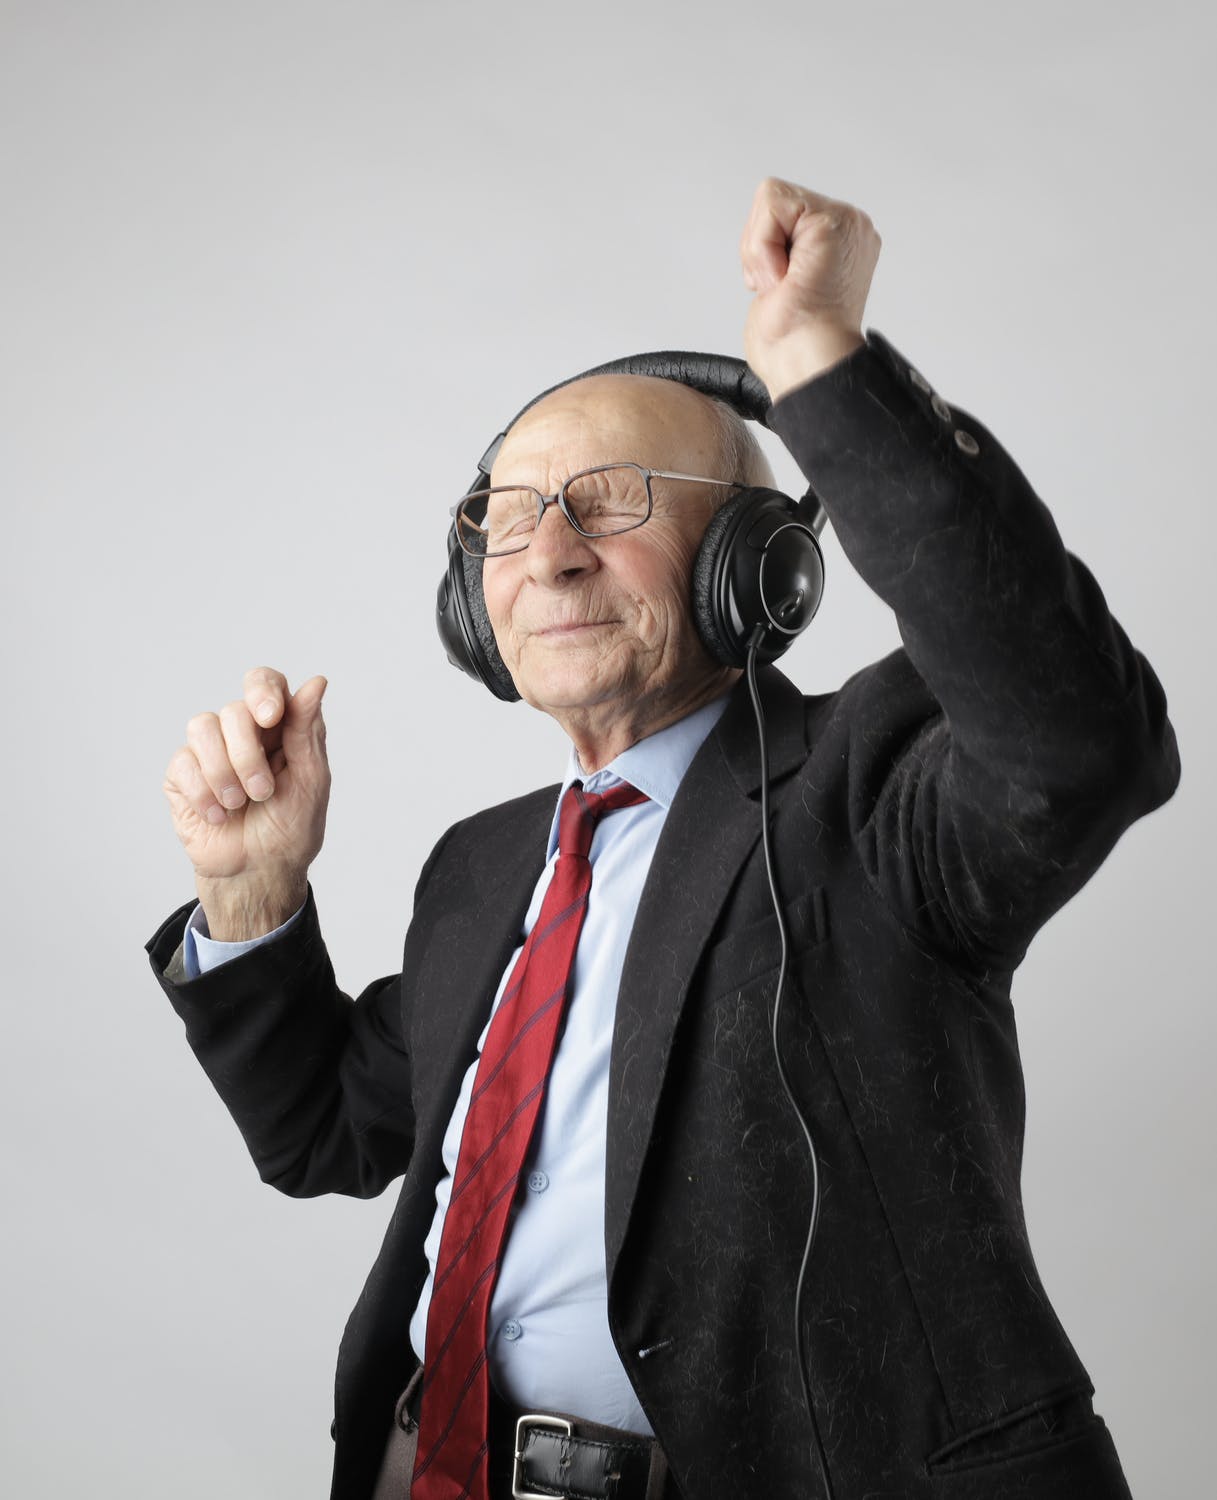 Music and Dementia